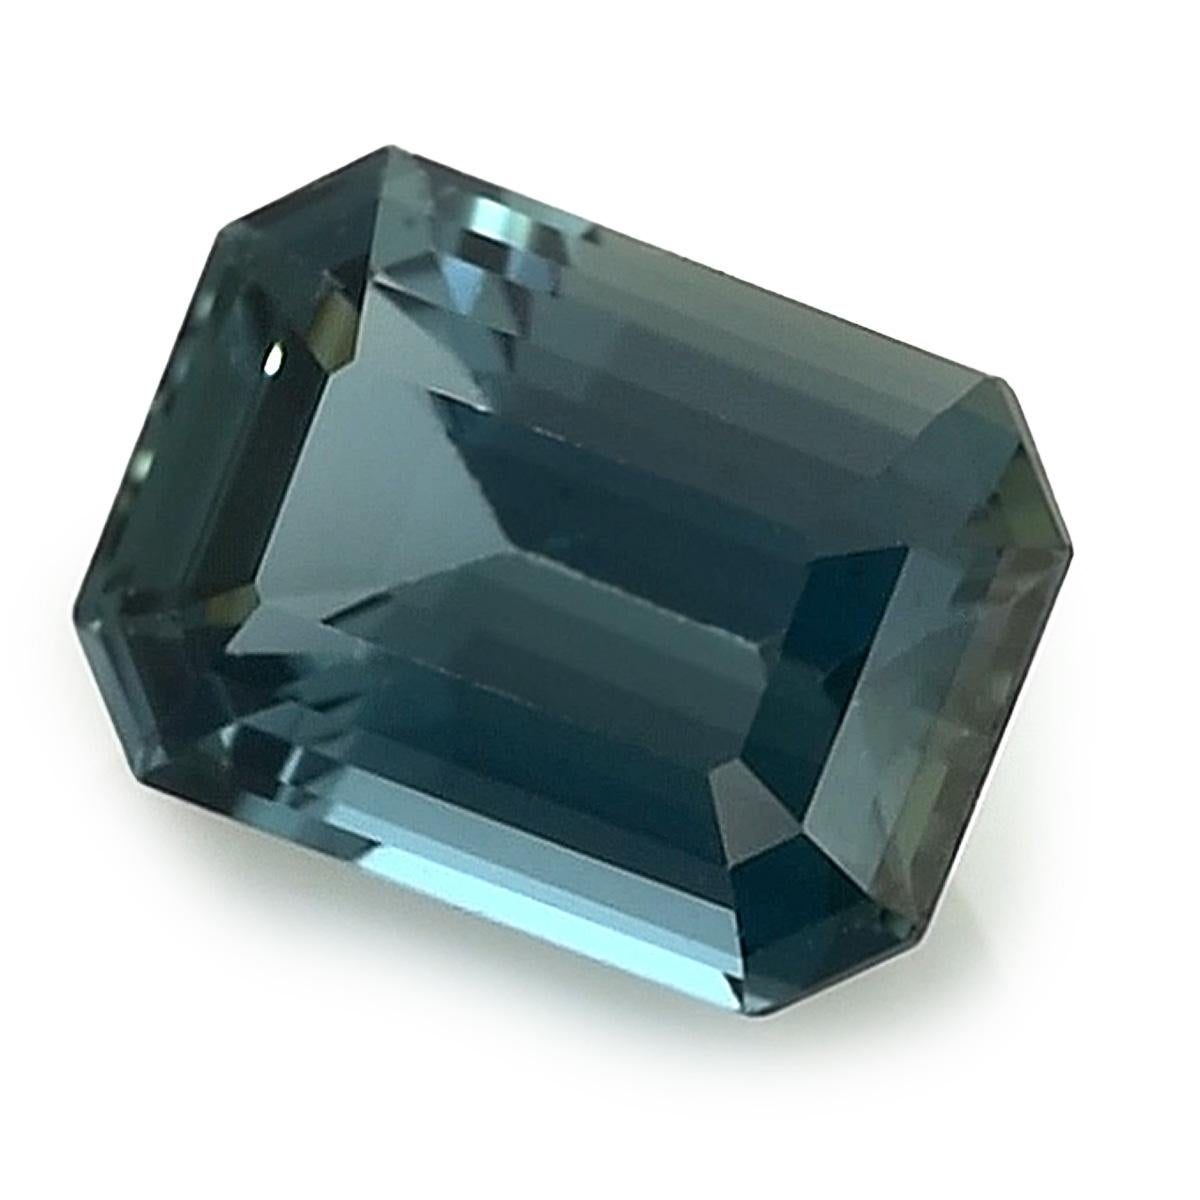 Presenting a Natural Green Blue Sapphire, graced with a weight of 1.22 carats. This alluring gem takes on an Octagonal shape, exhibiting precise measurements of 6.99 x 4.99 x 3.50 mm. Its brilliance is accentuated by the Brilliant/Step cut,